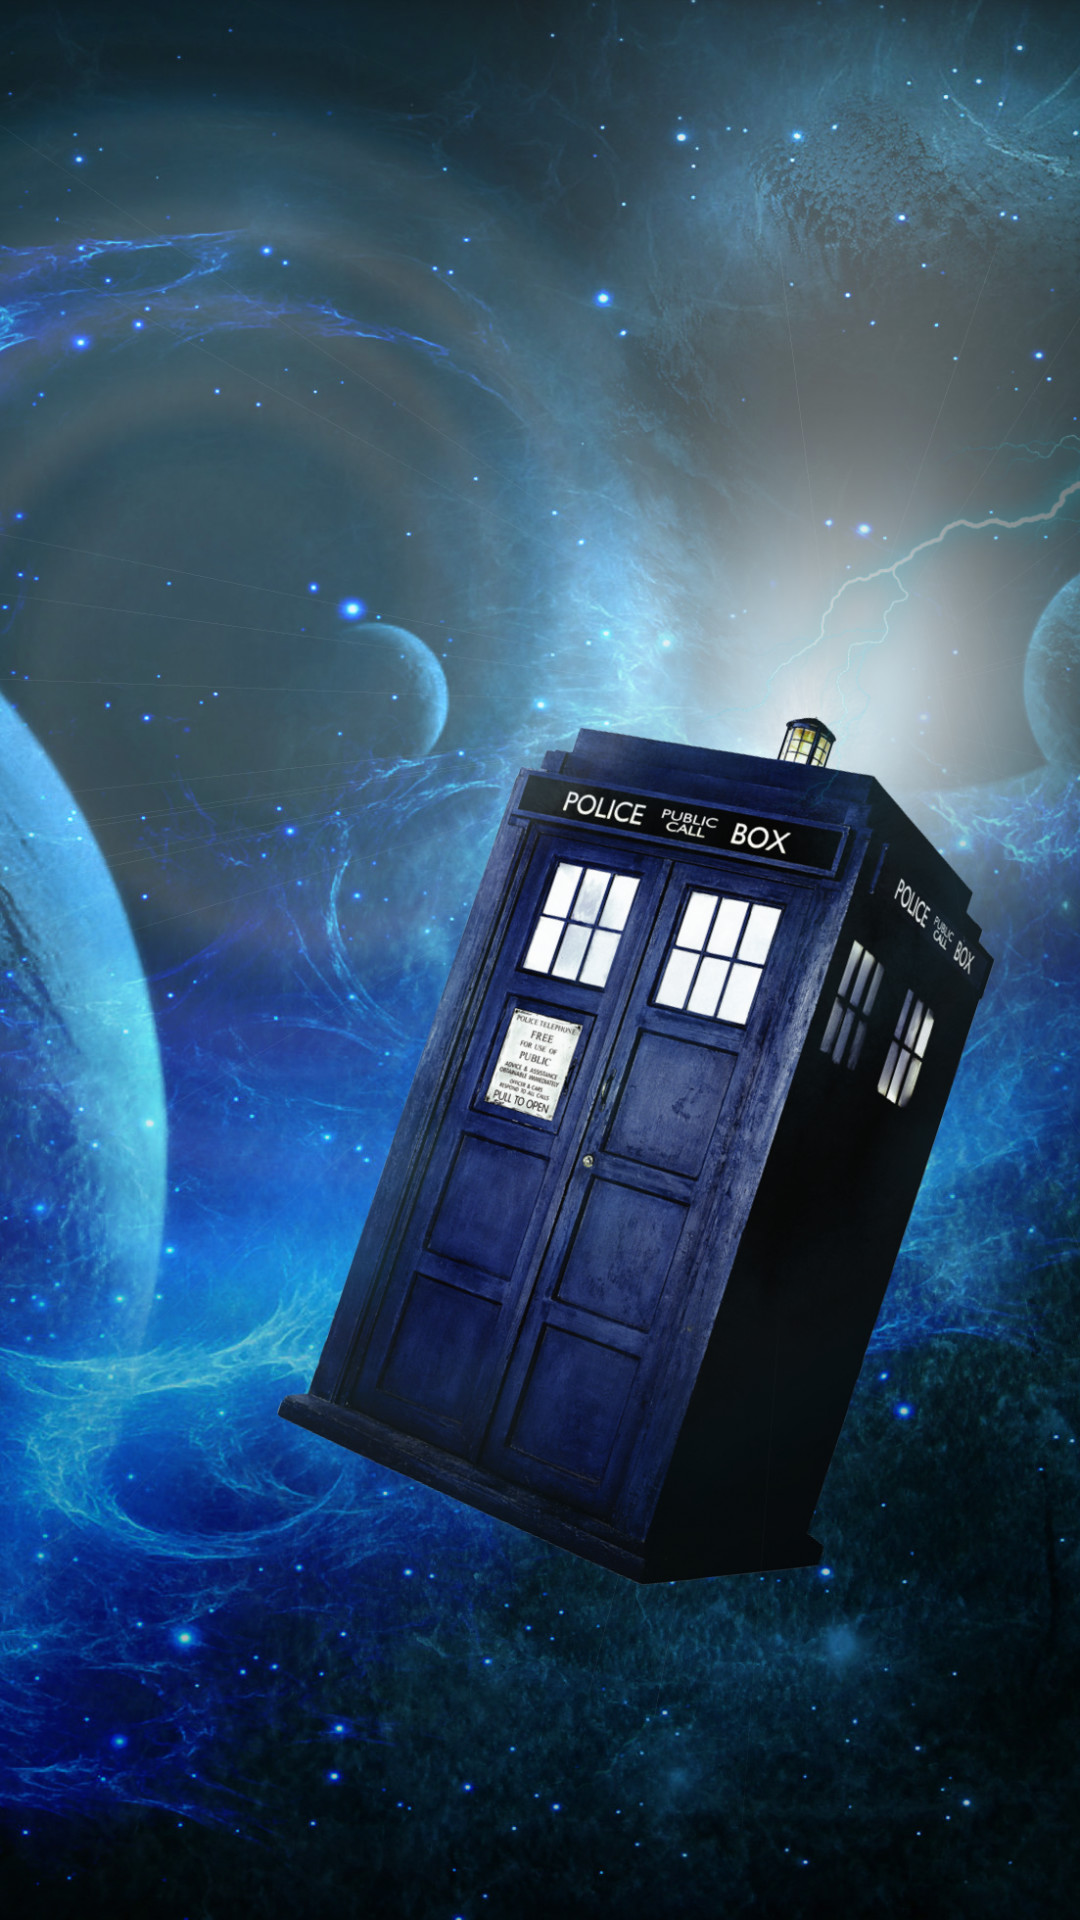 1080x1920 Doctor Who HD Wallpapers Free Download – Unique 4K Ultra HD Backgrounds